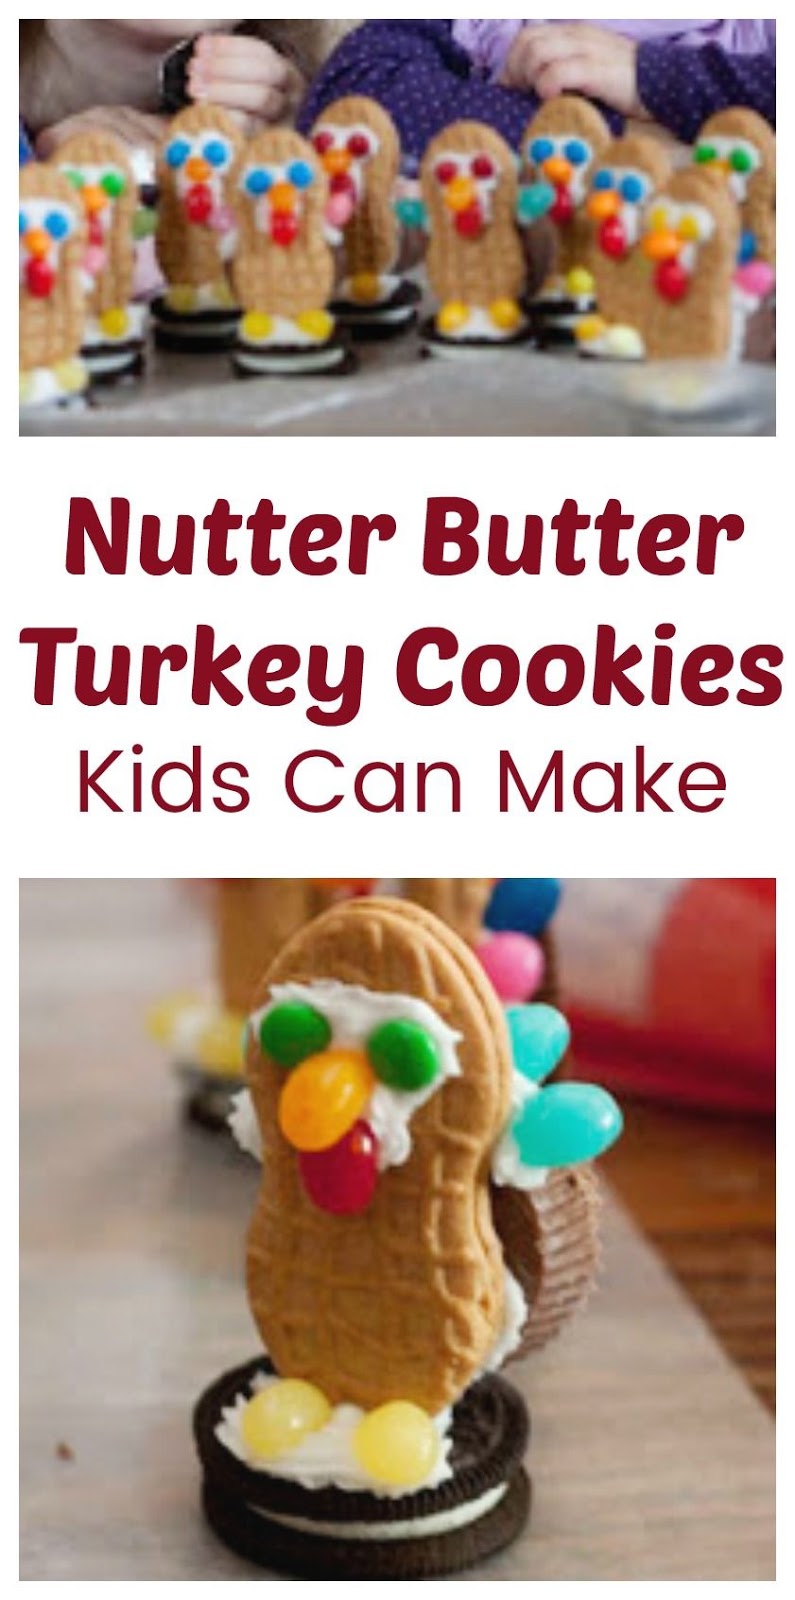 Adorable Turkey Cookies from Nutter Butters - Life with Moore Babies